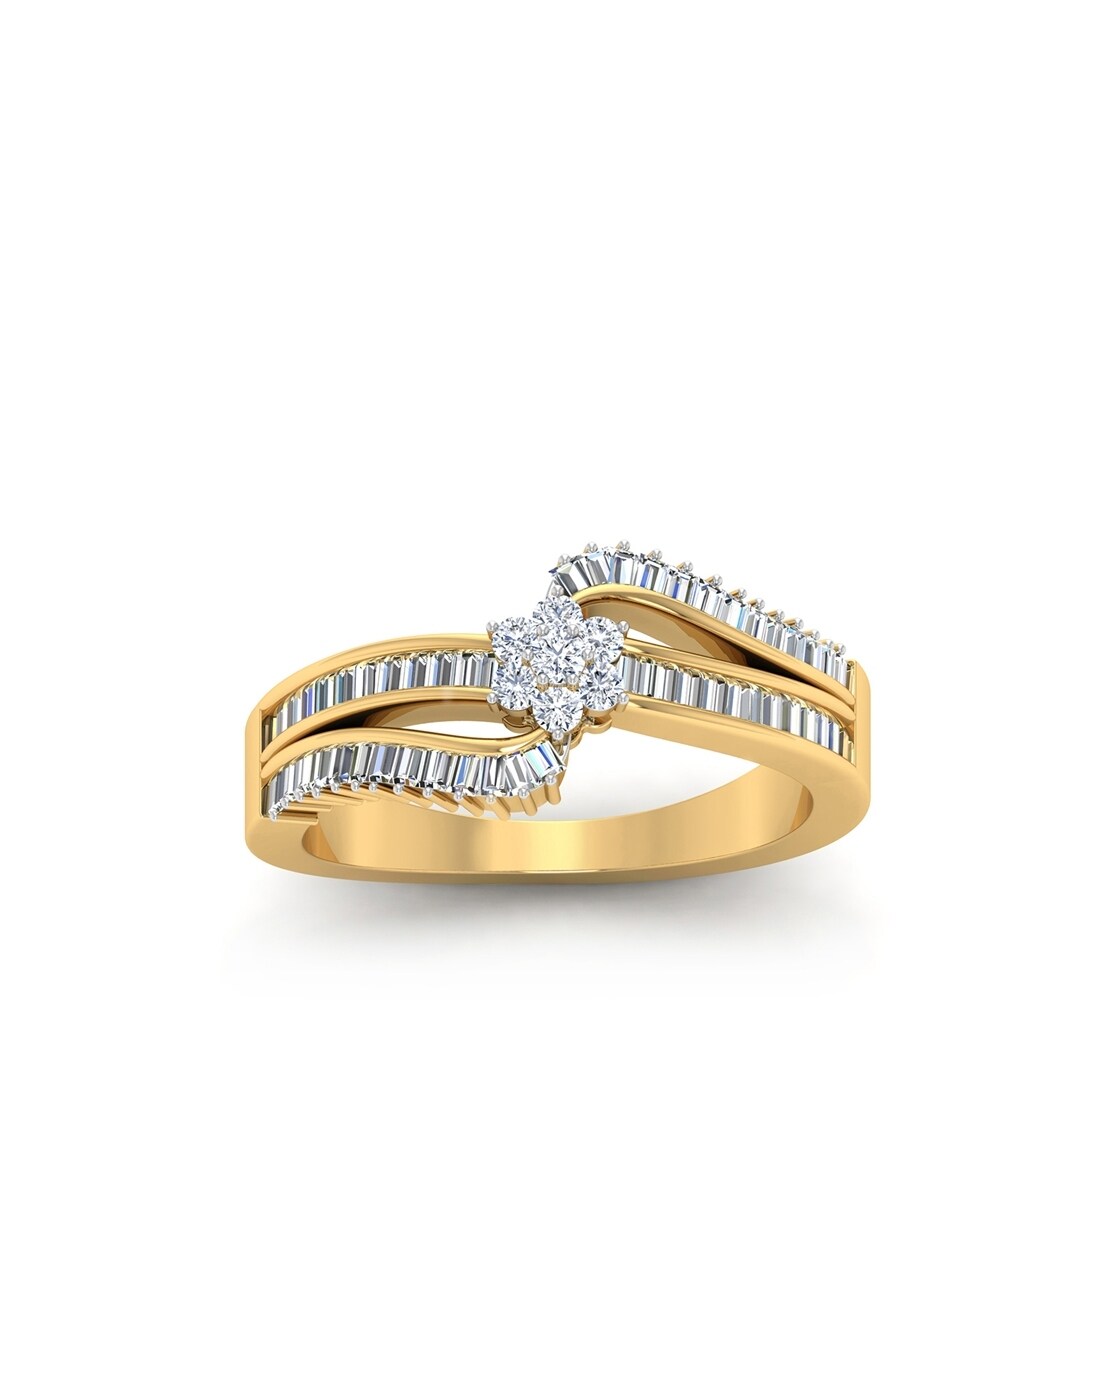 Royal Diamond - Silver Made Diamond Finger Ring For Men Promotional Price :  15,750 Tk With Vat Product Details : Diamond Gent's Ring 1 Piece Solitaire  Diamond Carat : 0.05 ct (Total